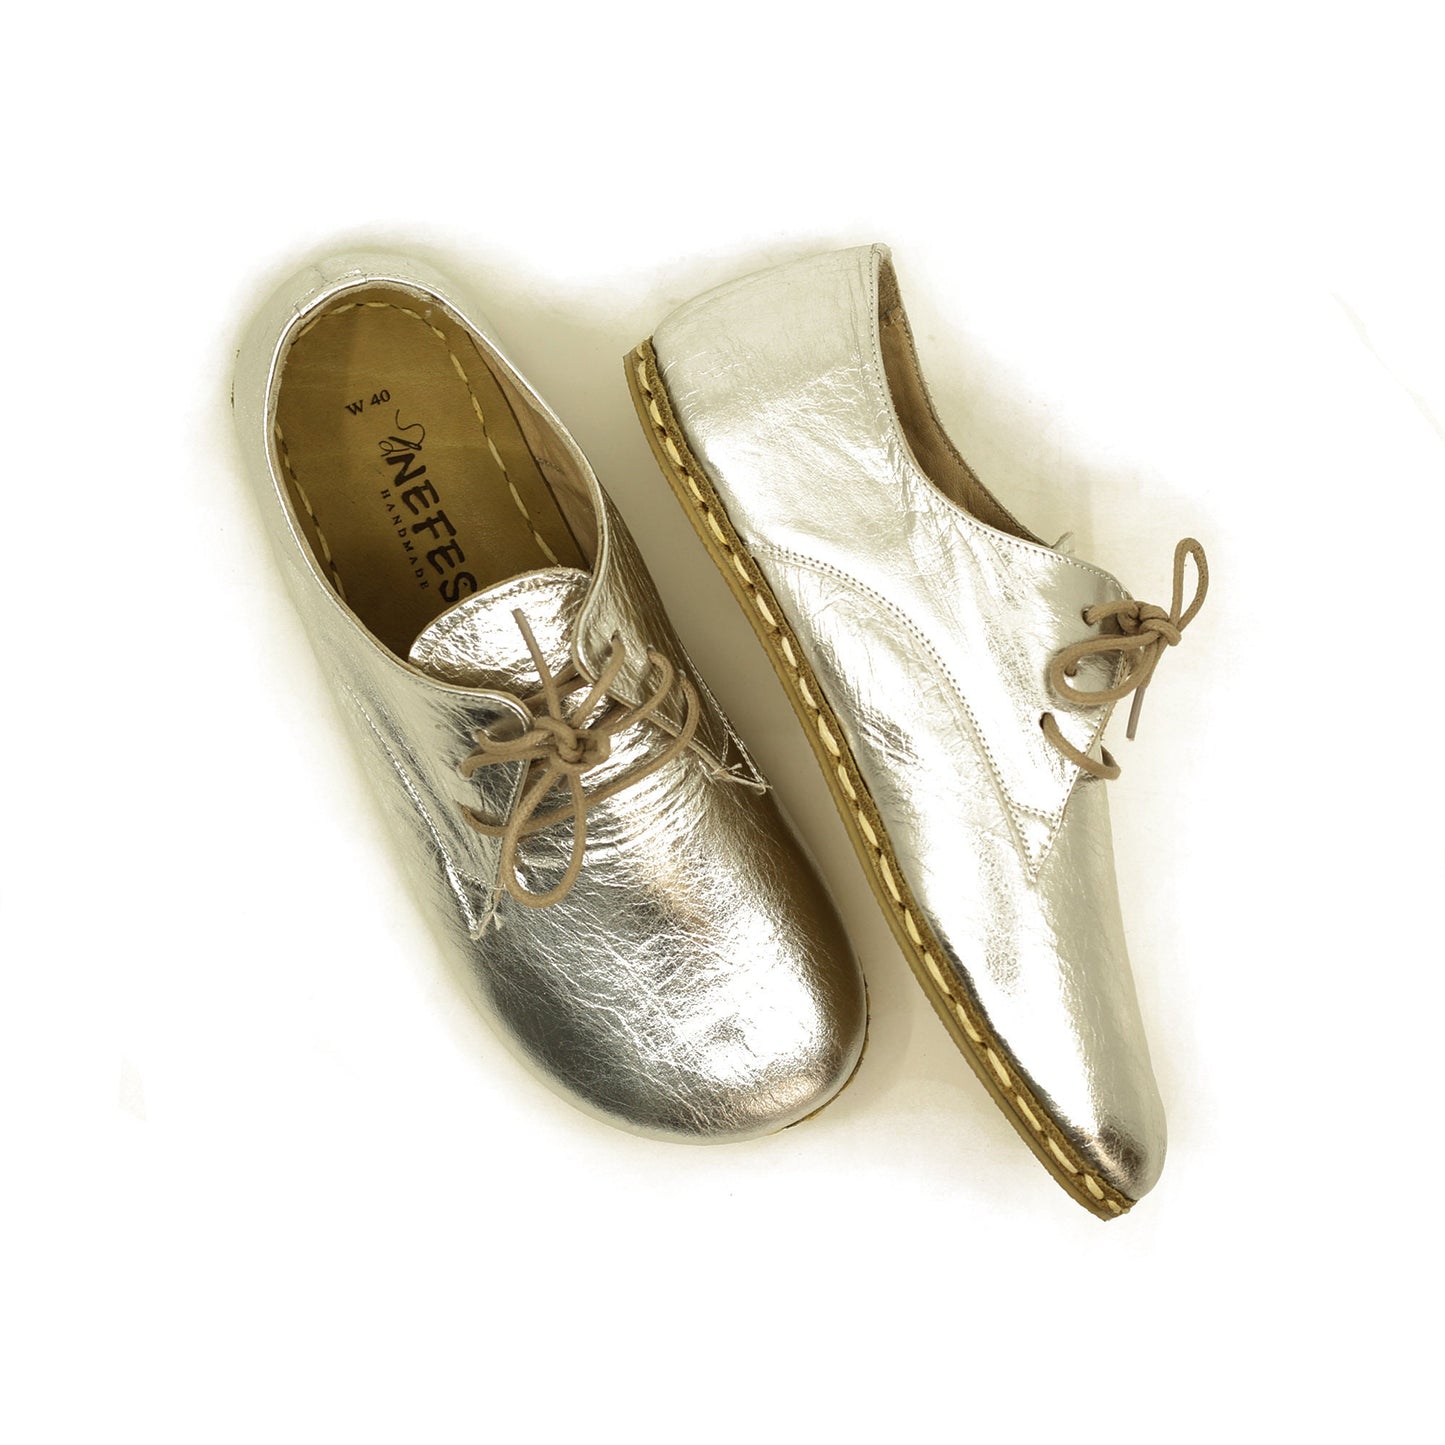 Women - Handmade - Oxford - Laced - Barefoot - Leather Shoes, - Shiny Silver